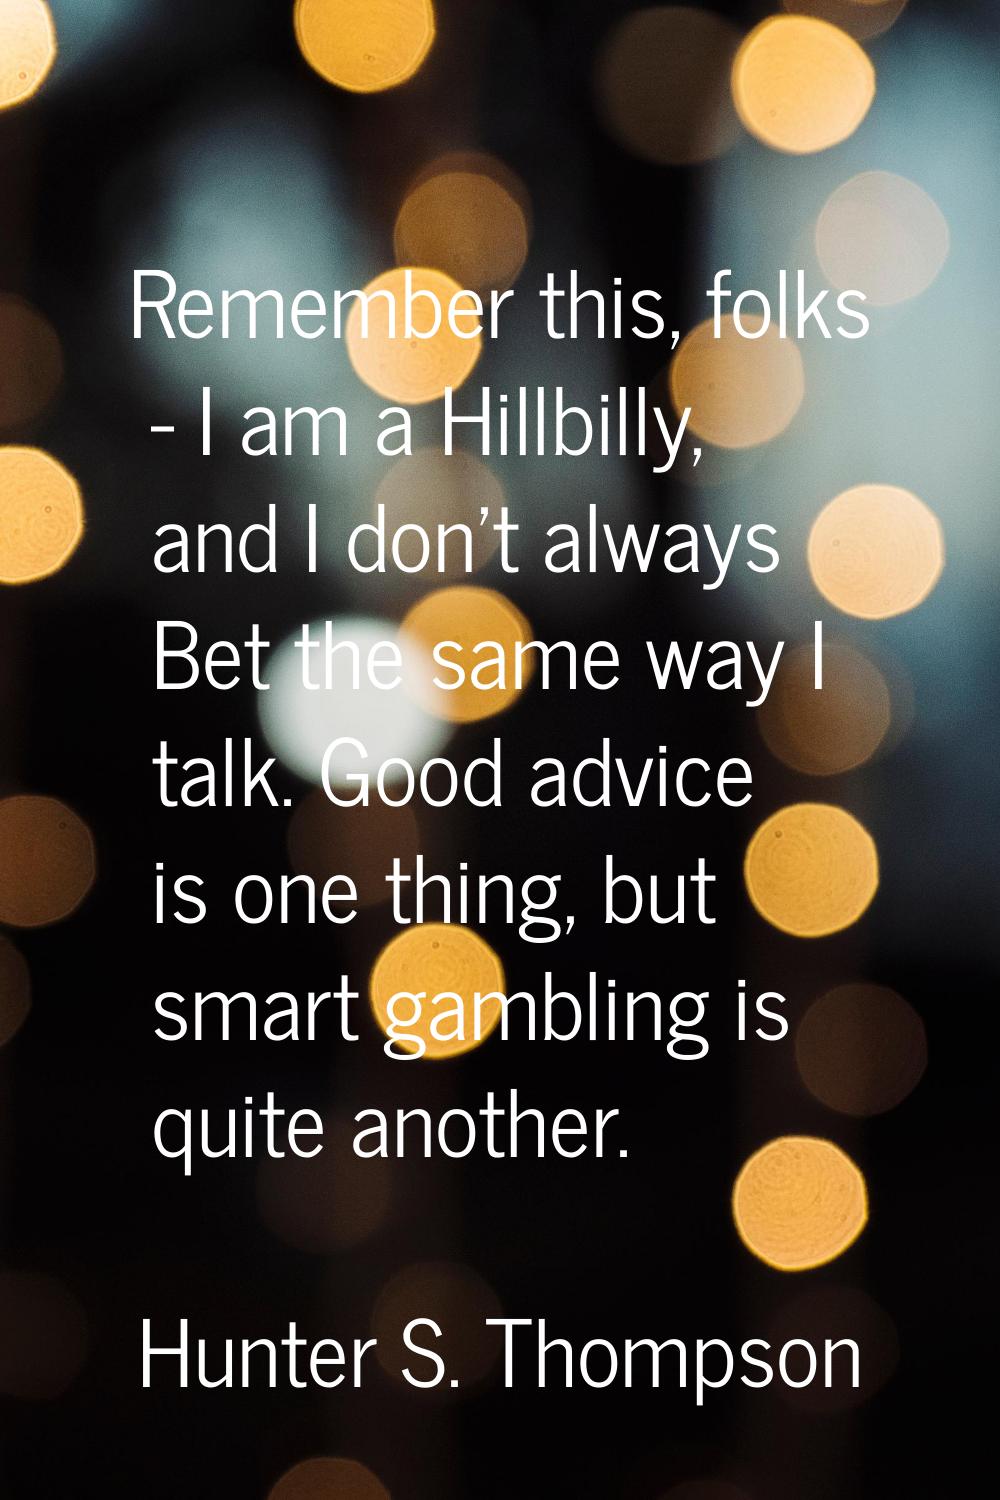 Remember this, folks - I am a Hillbilly, and I don't always Bet the same way I talk. Good advice is